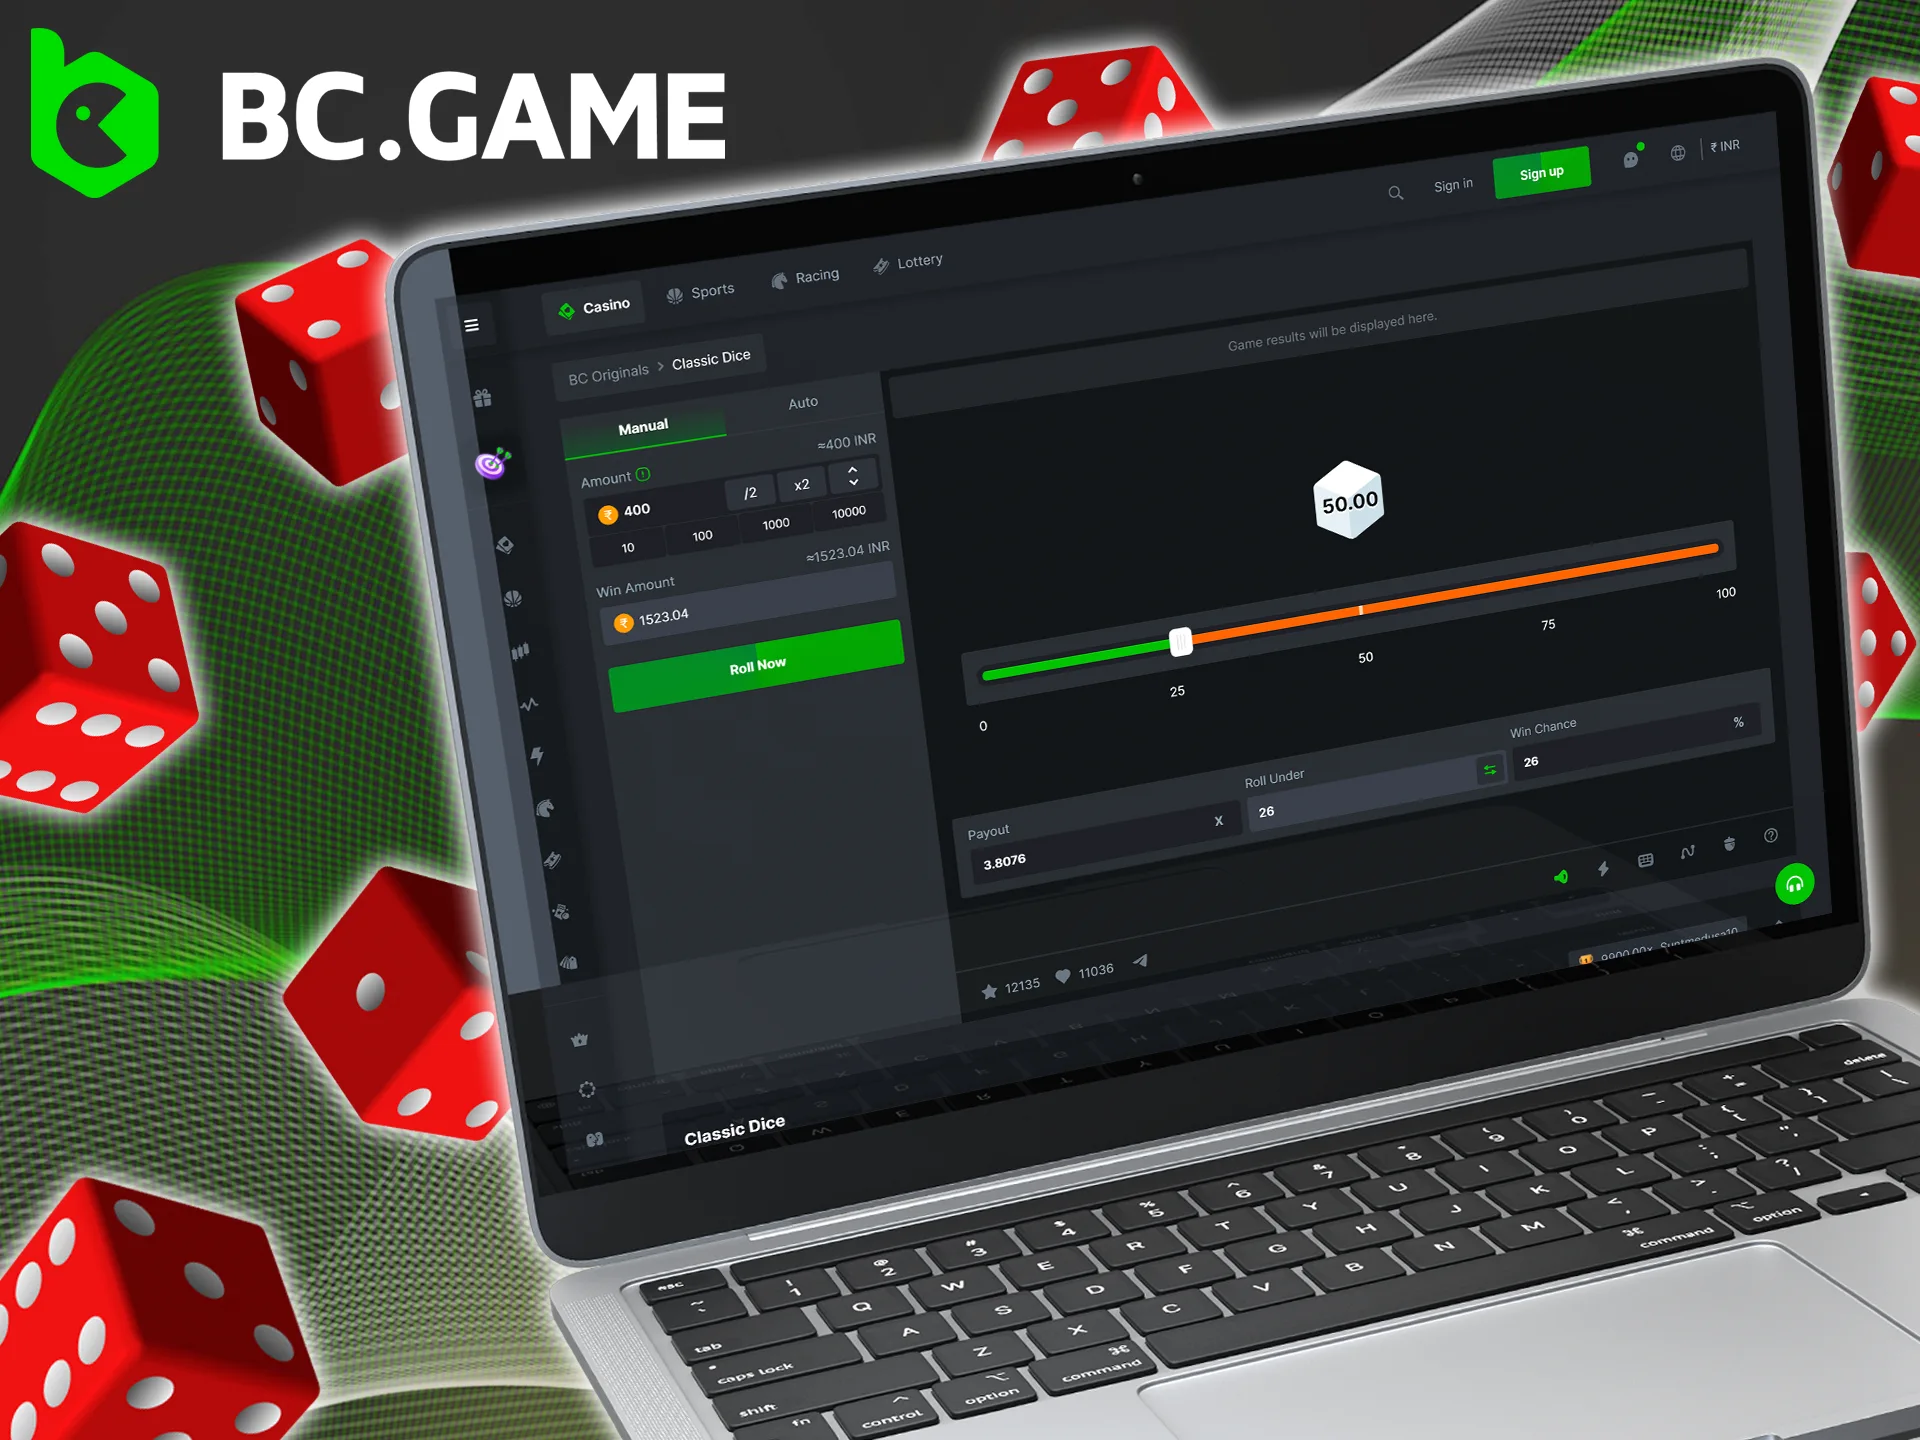 Read the rules of the game before you start playing Classic Dice by BC Game.